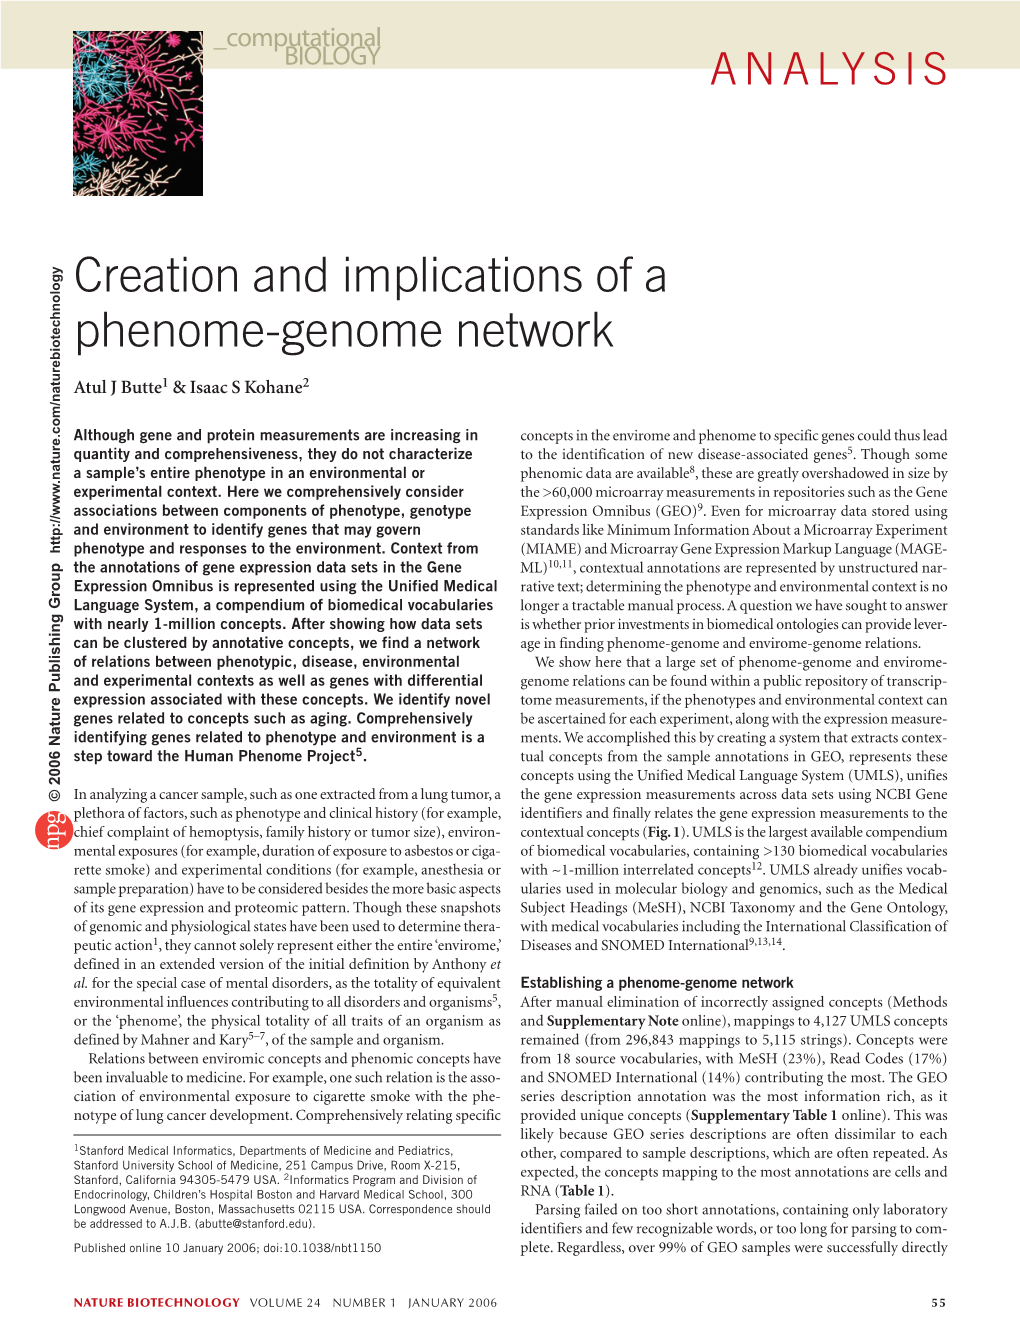 Creation and Implications of a Phenome-Genome Network